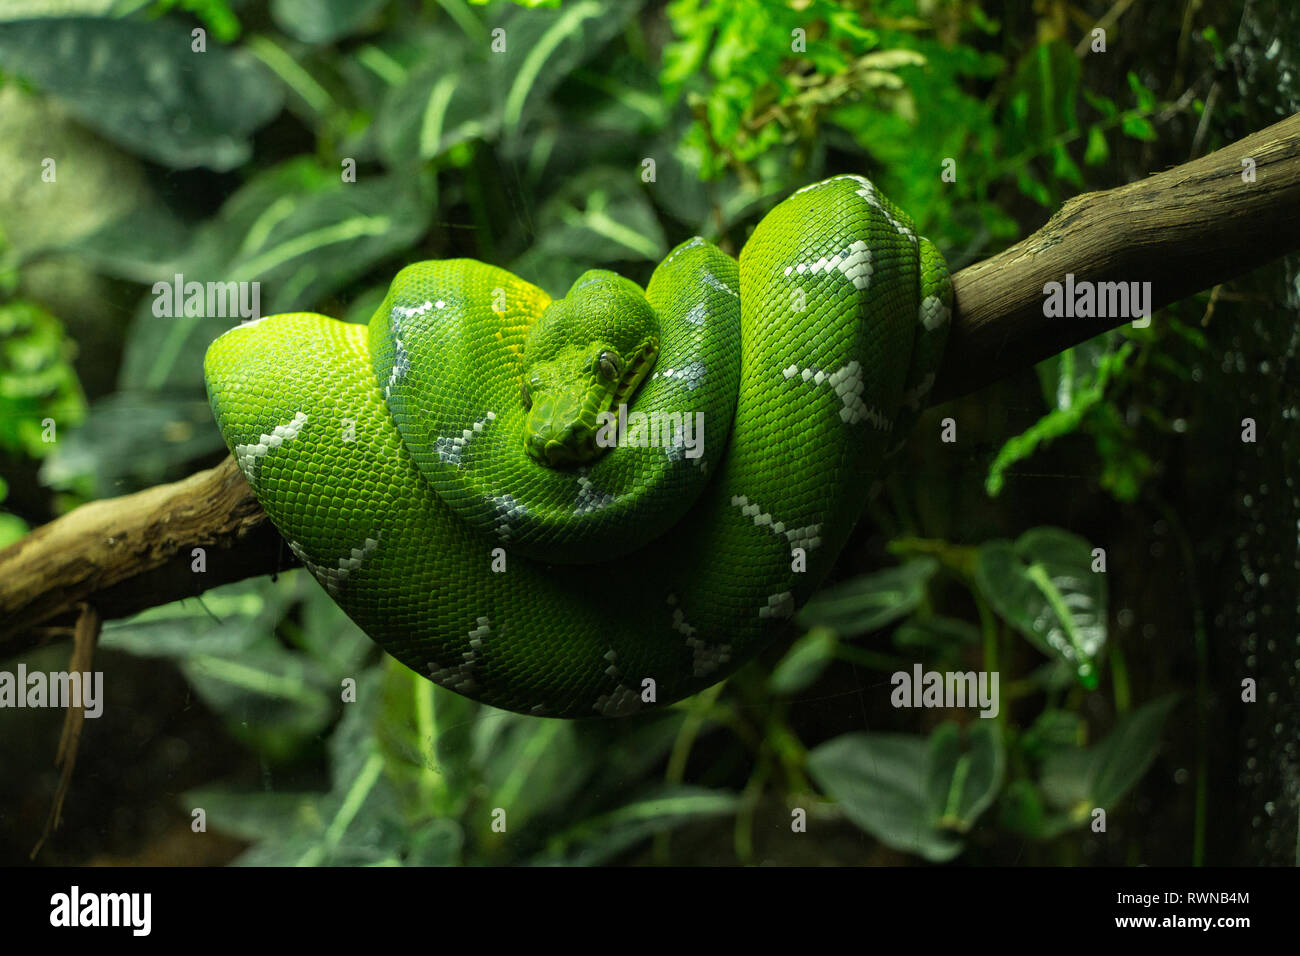 Green Snake coiled around a branch with green foliage i, the background Stock Photo